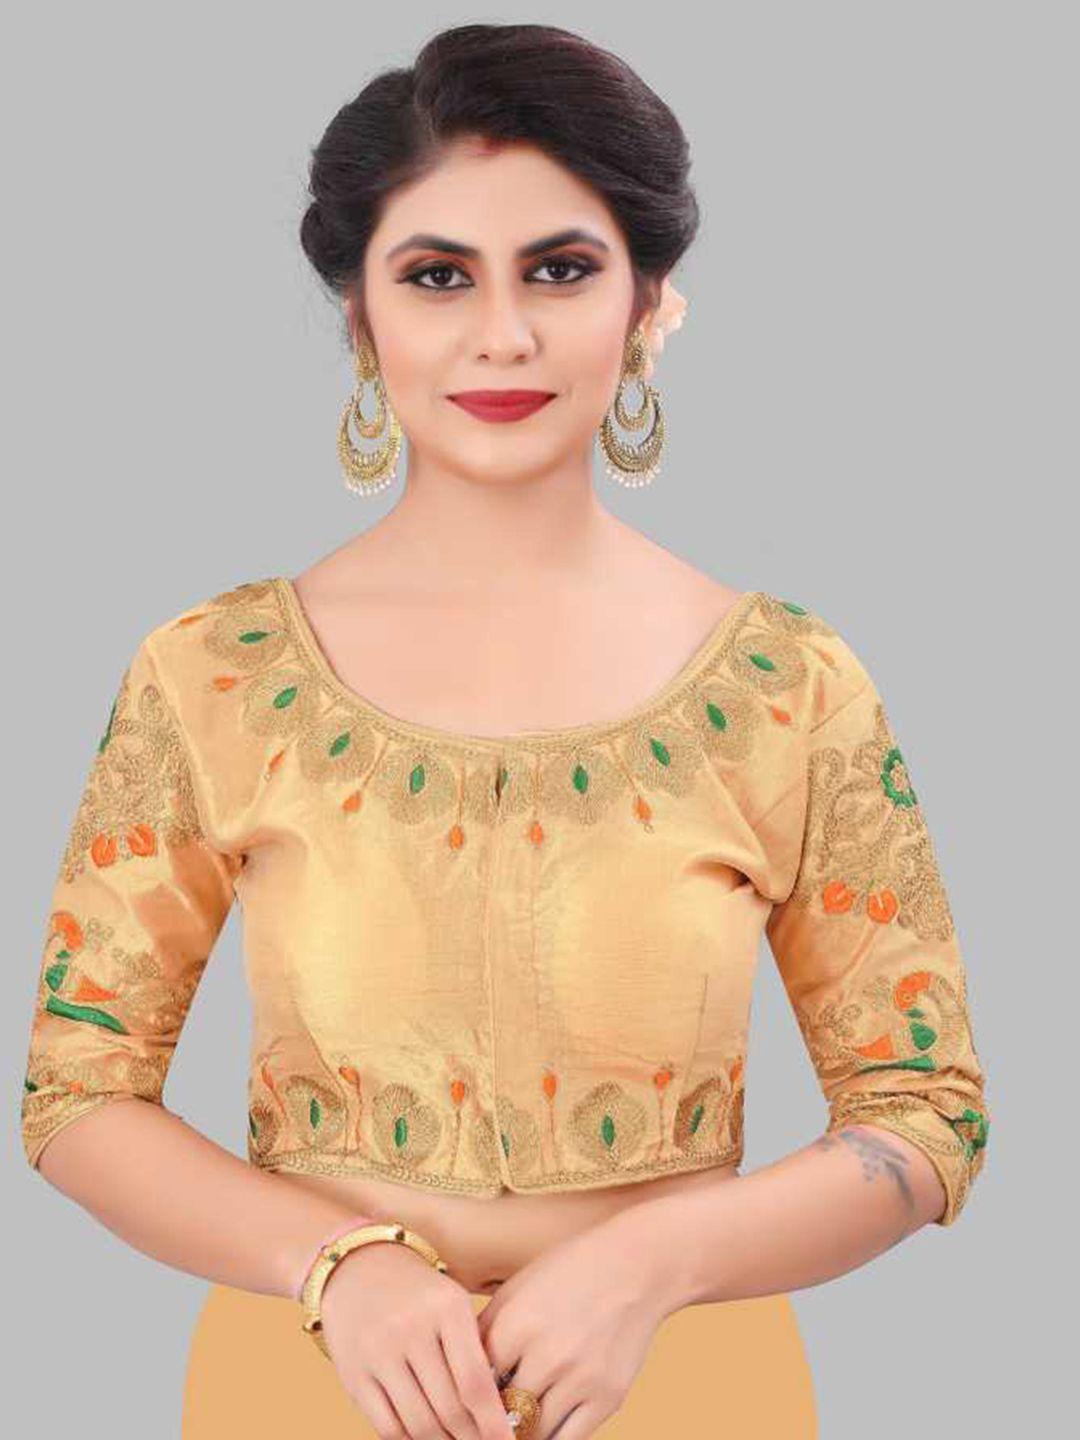 linaro lifestyles women gold & green embroidered ready-made saree blouse